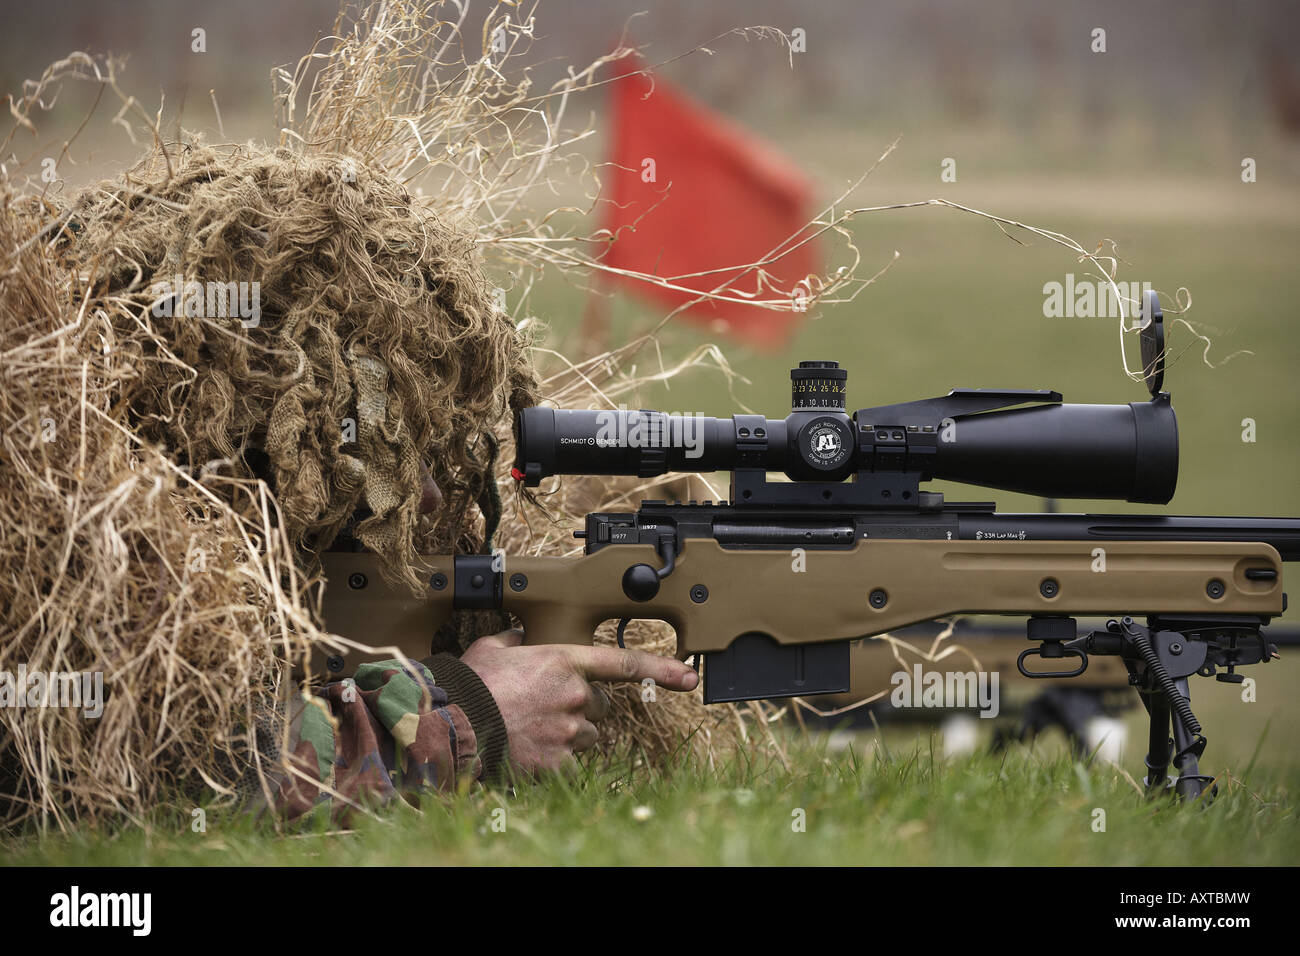 British Army Infantry soldiers demonstrate their newest L115A3 sniper rifle on firing ranges of the Support Weapon School UK Stock Photo